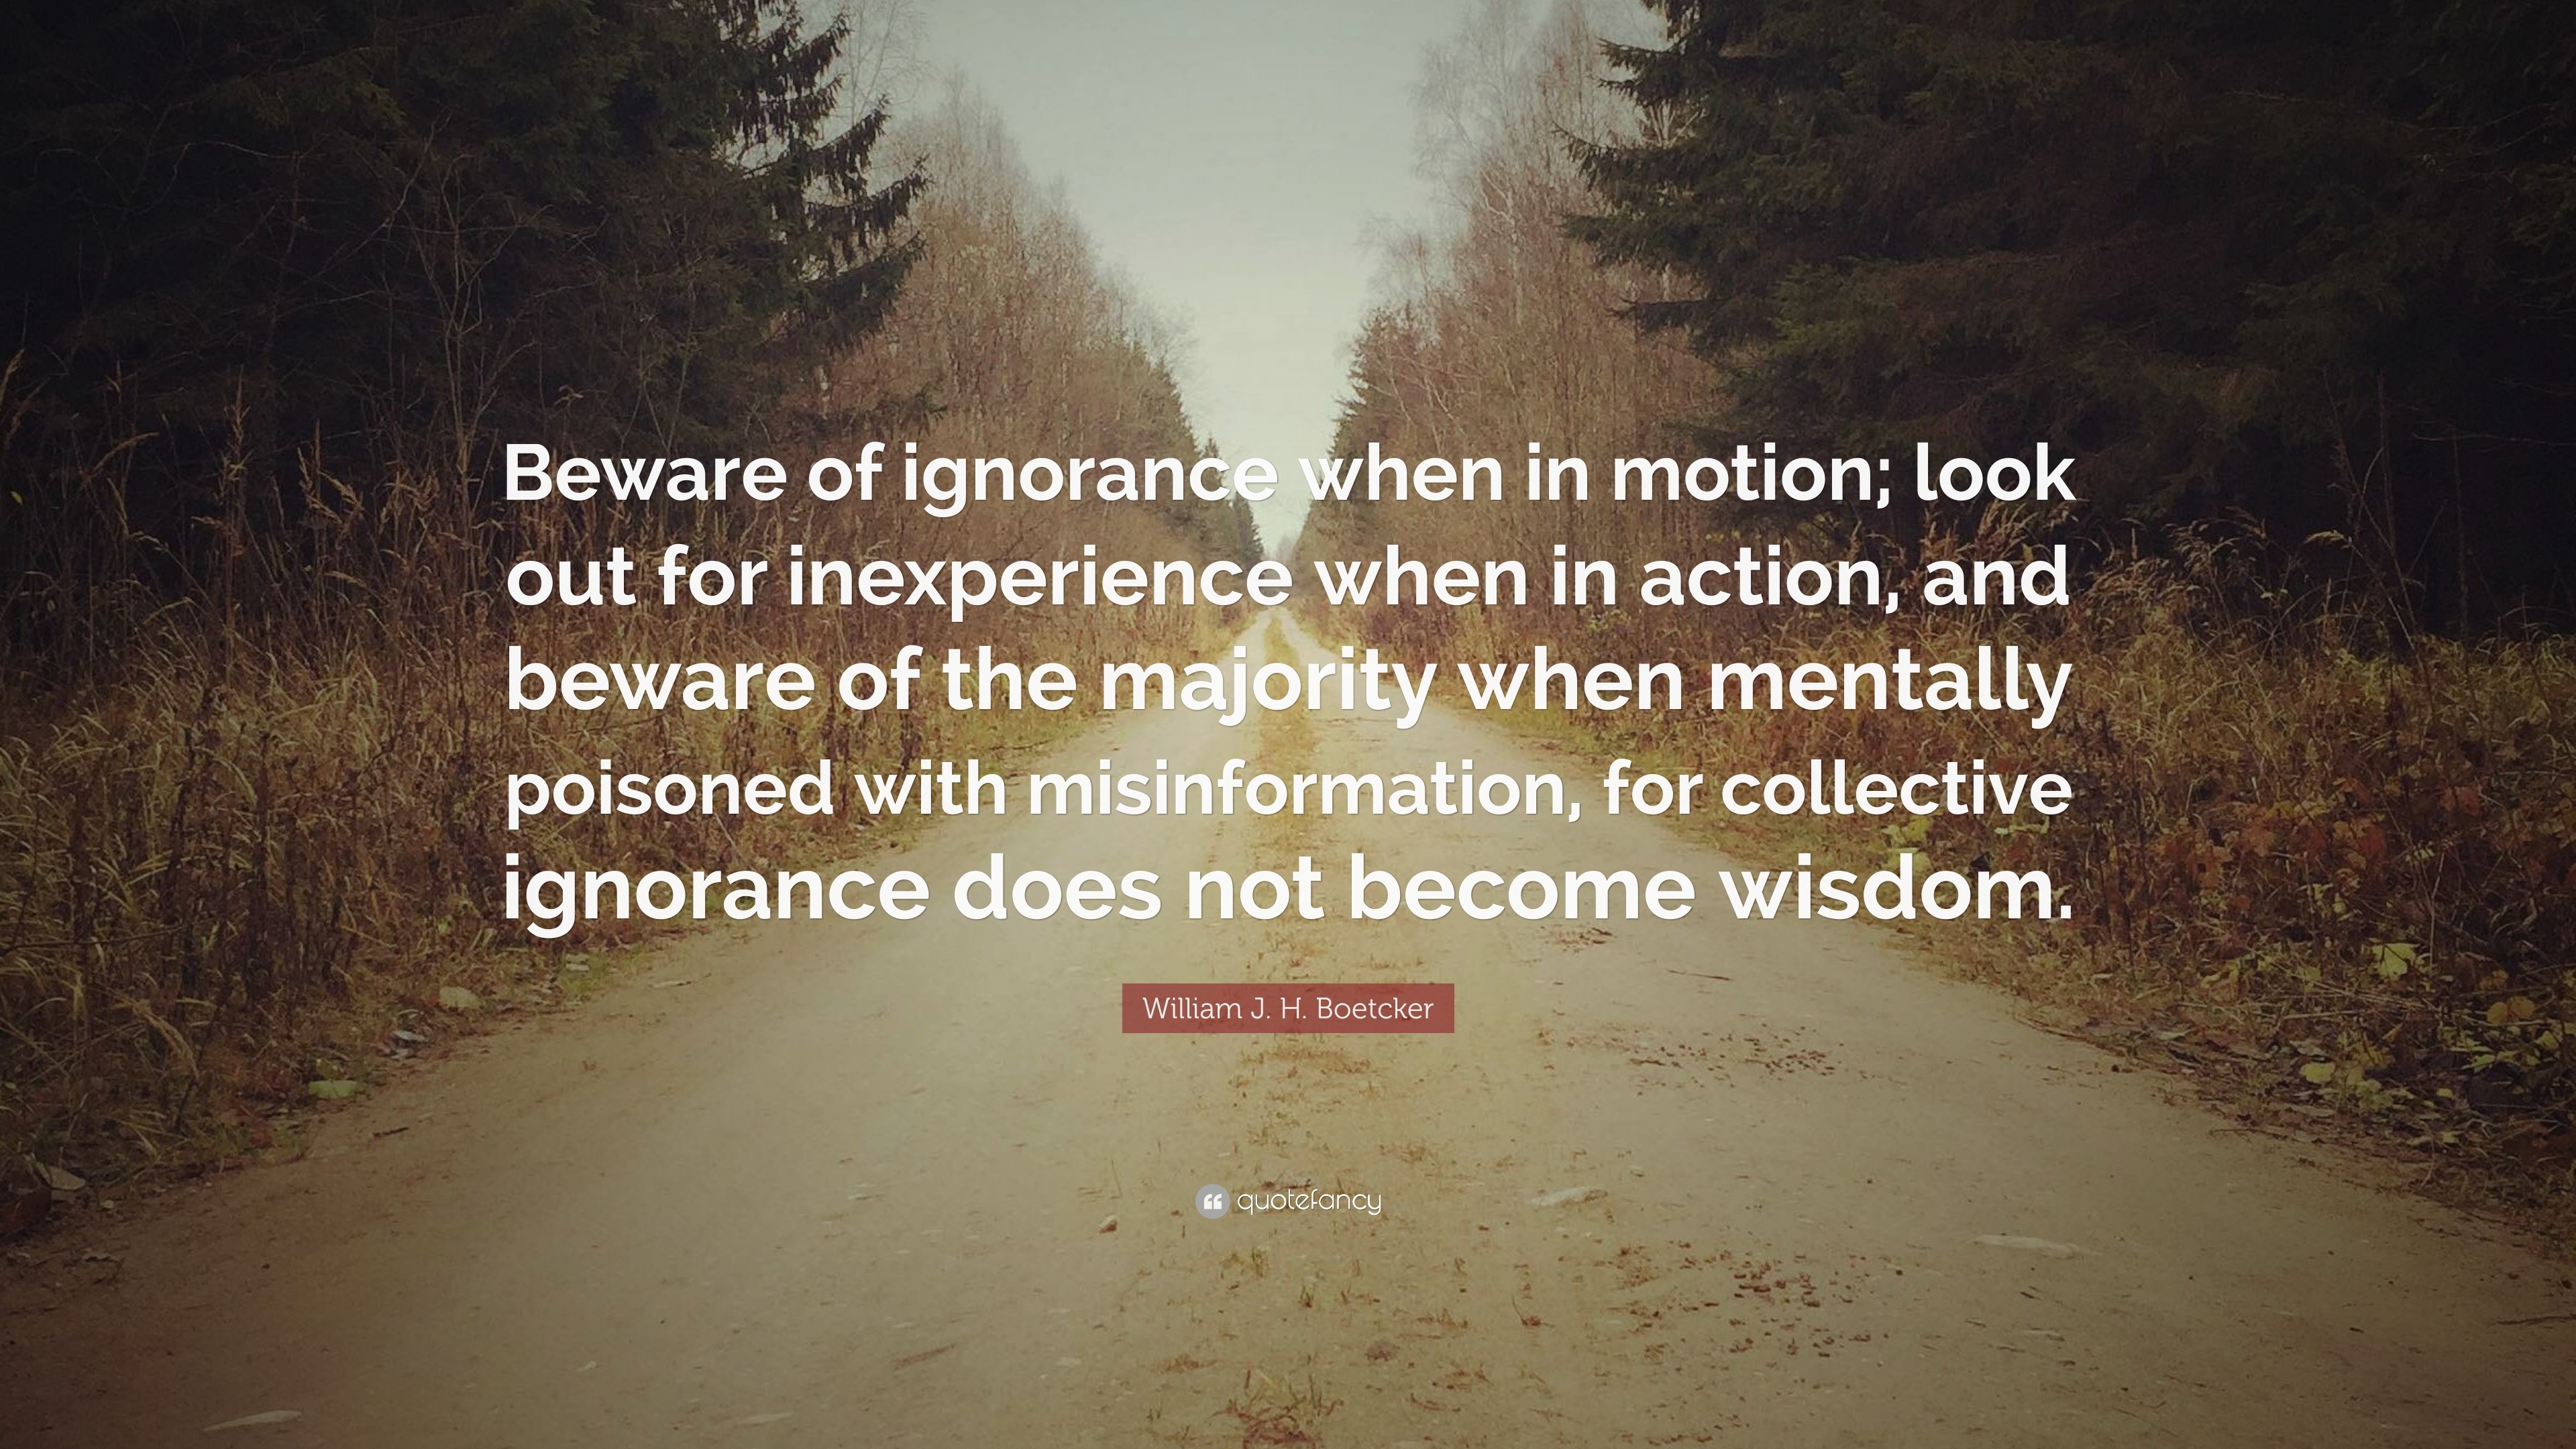 William J H Boetcker Quote Beware Of Ignorance When In Motion Look Out For Inexperience When In Action And Beware Of The Majority When Mentally P